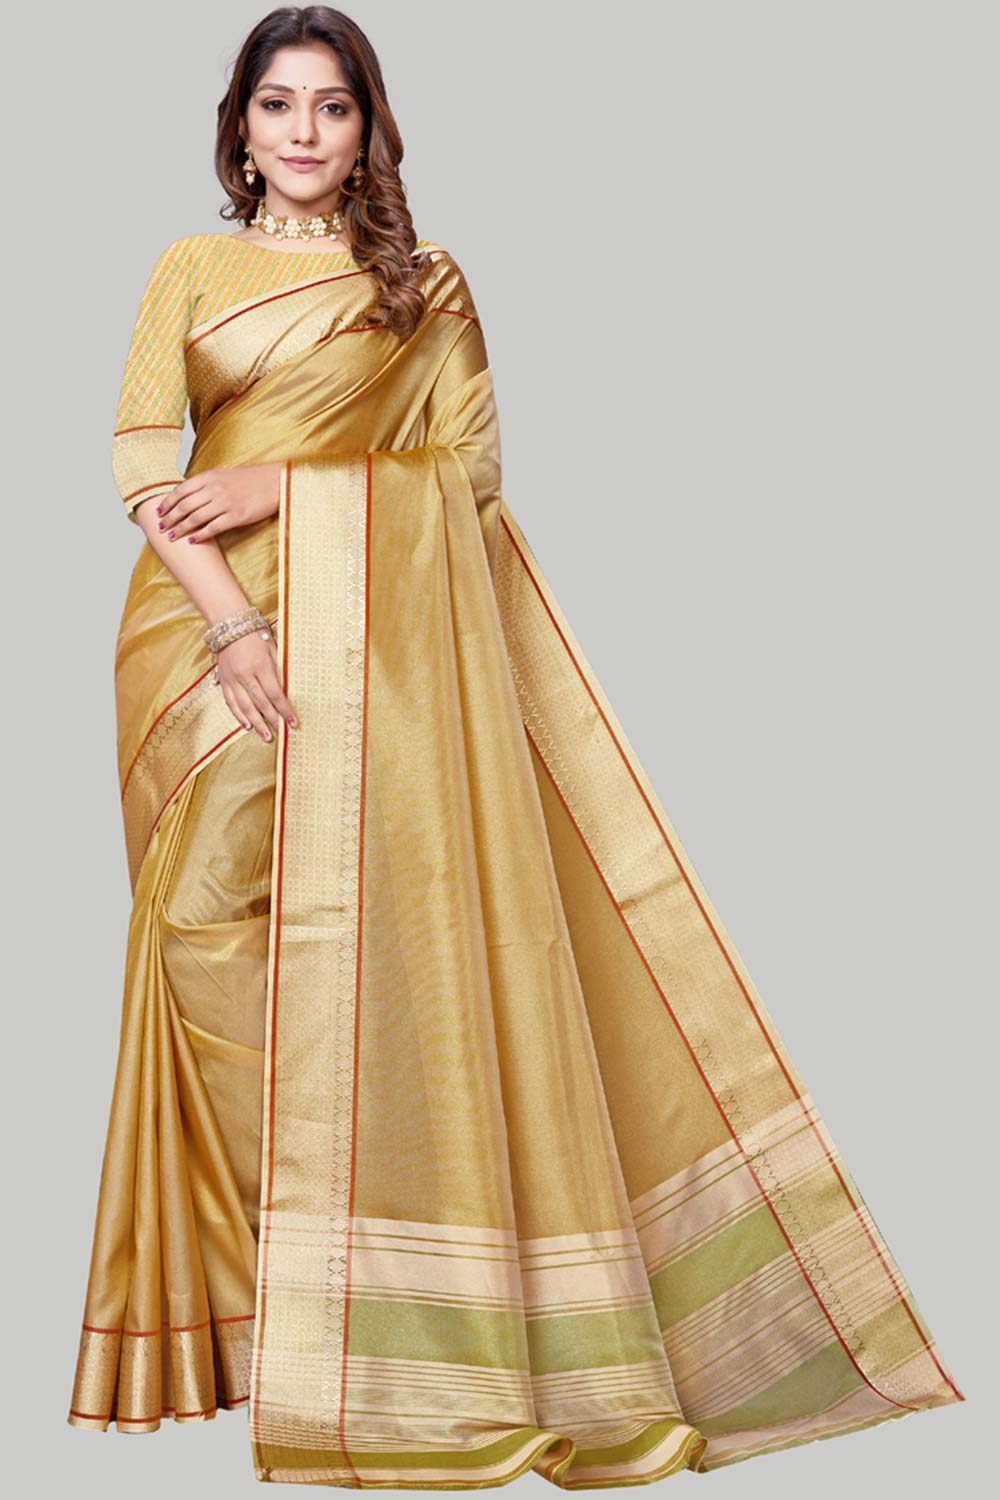 Buy Jute Cotton Woven Border Solid Saree in Gold Online